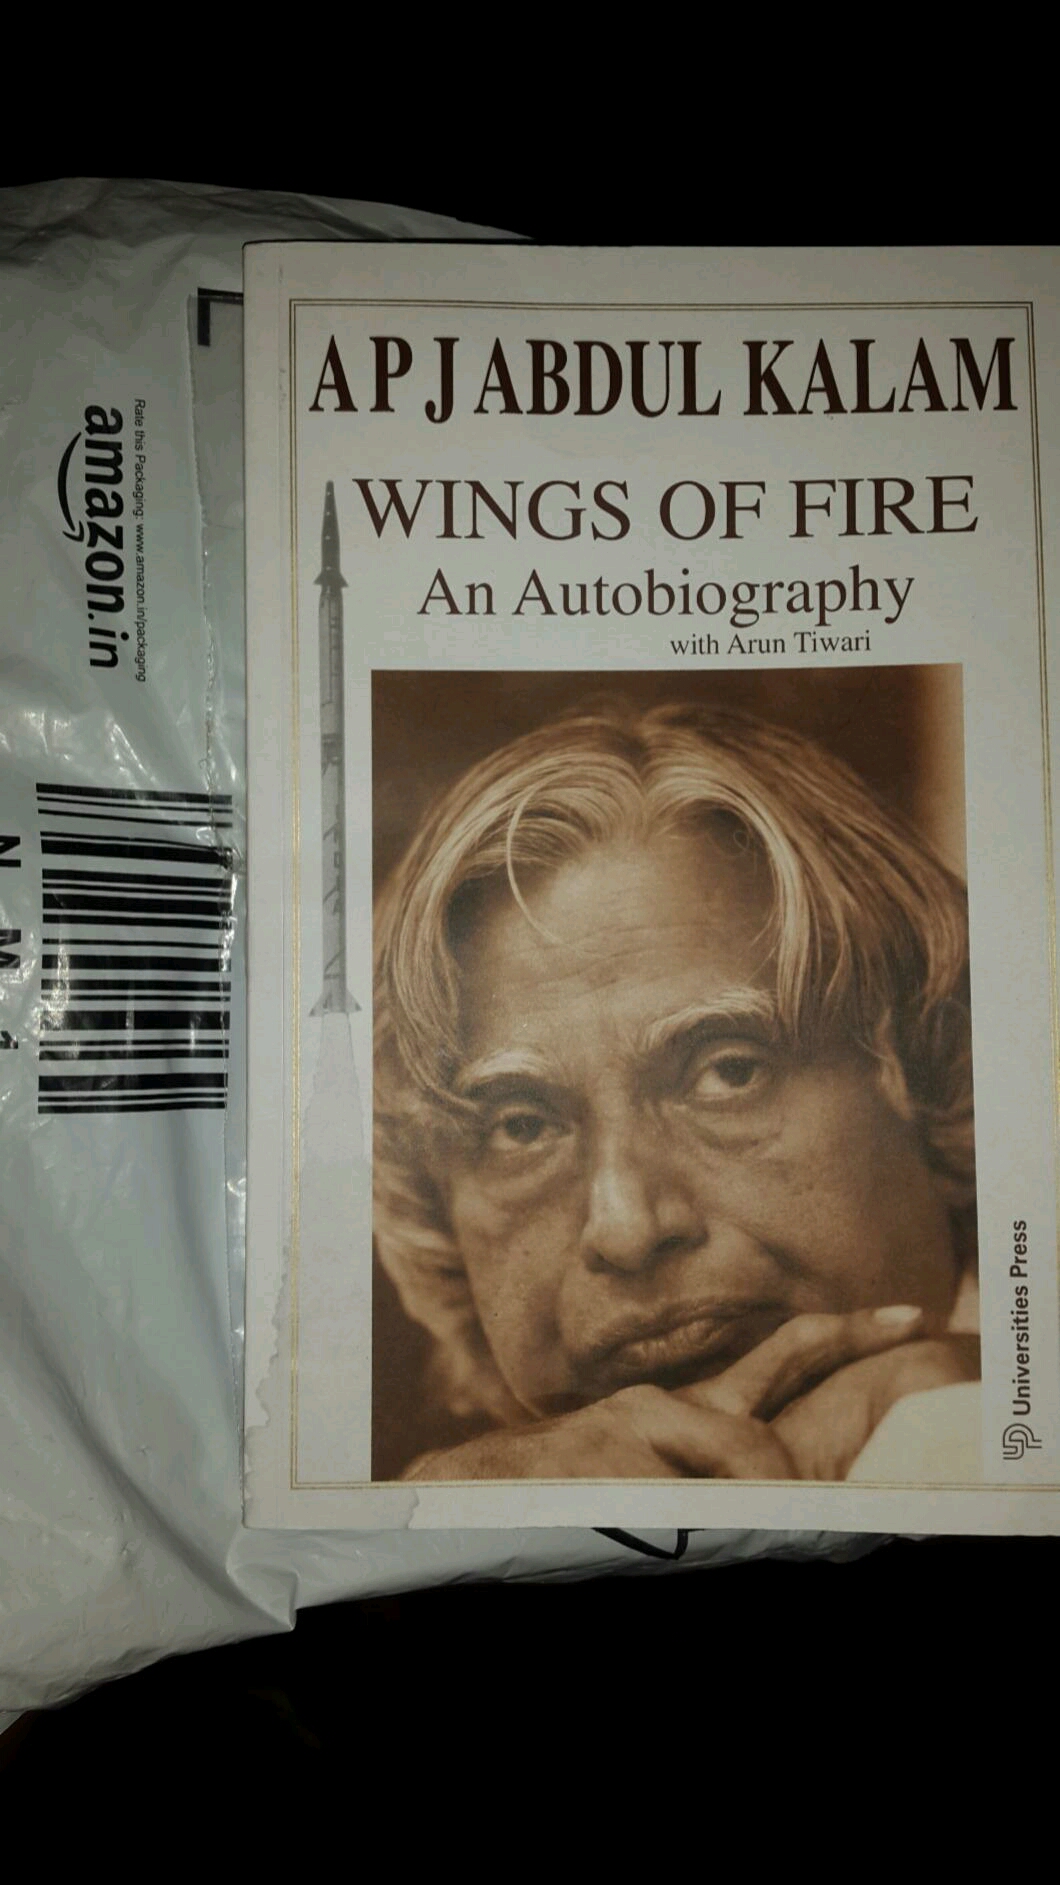 wings of fire is an autobiography of